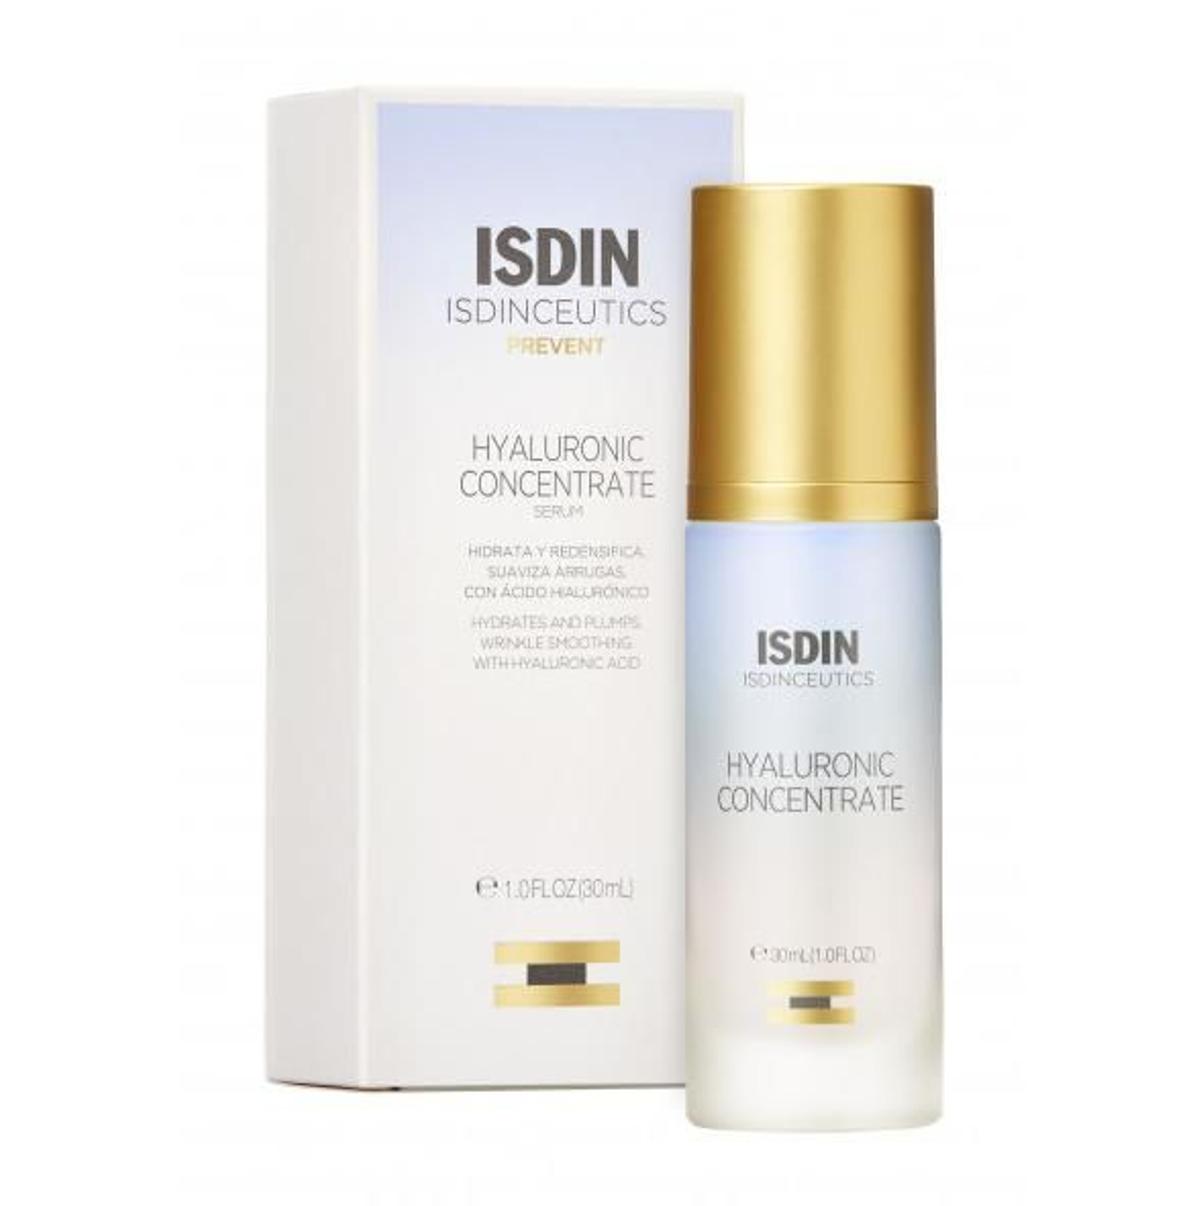 Hyaluronic concentrate ISDIN